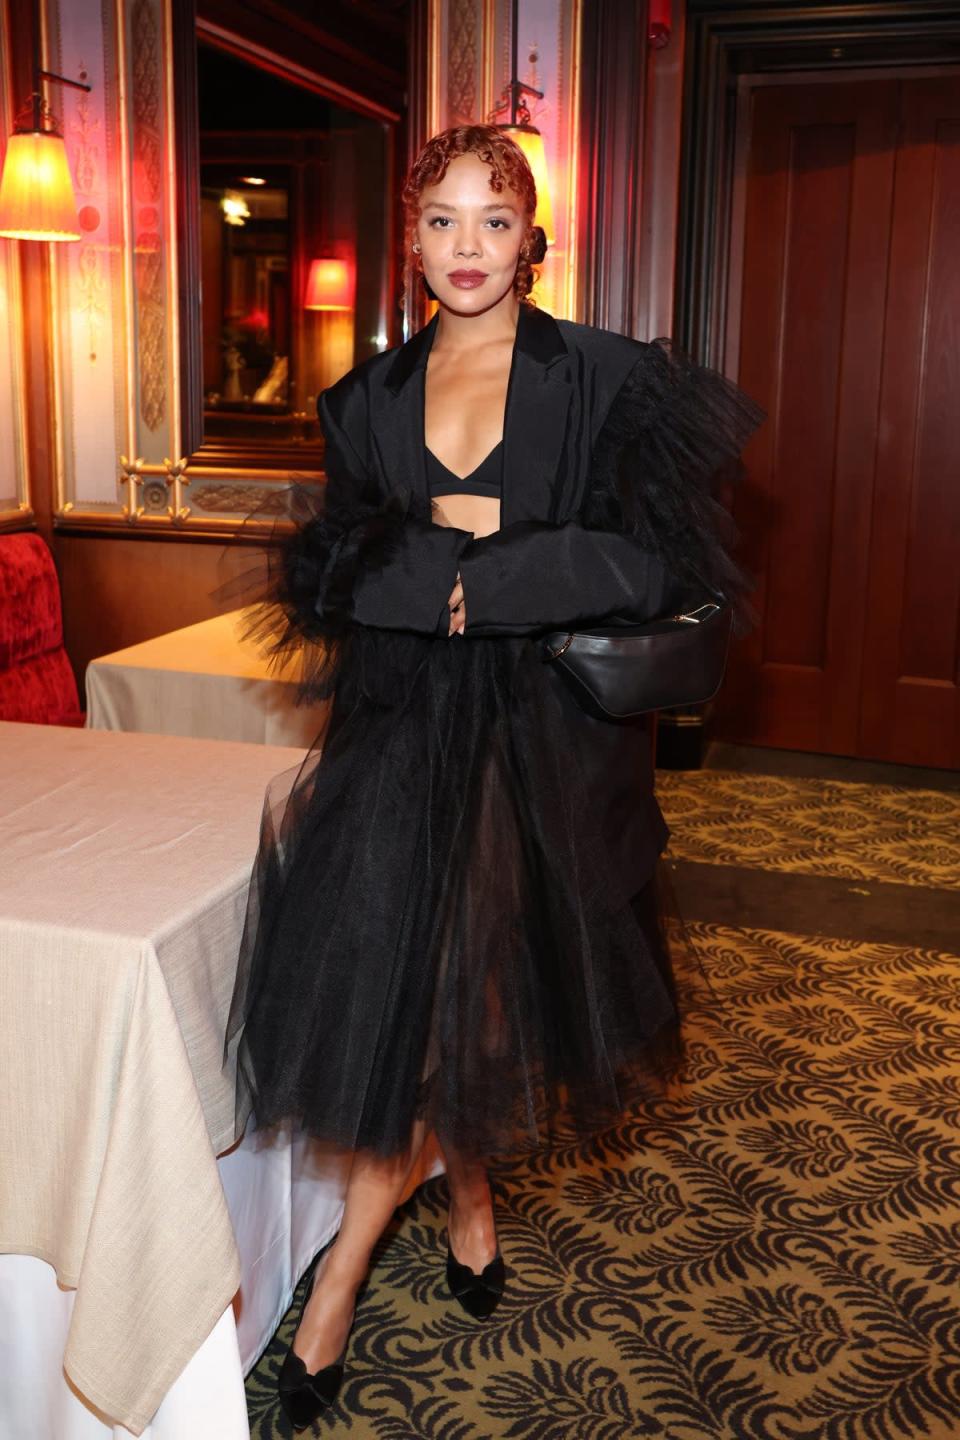 Tessa Thompson at the 2022 Venice Film Festival (Getty Images)